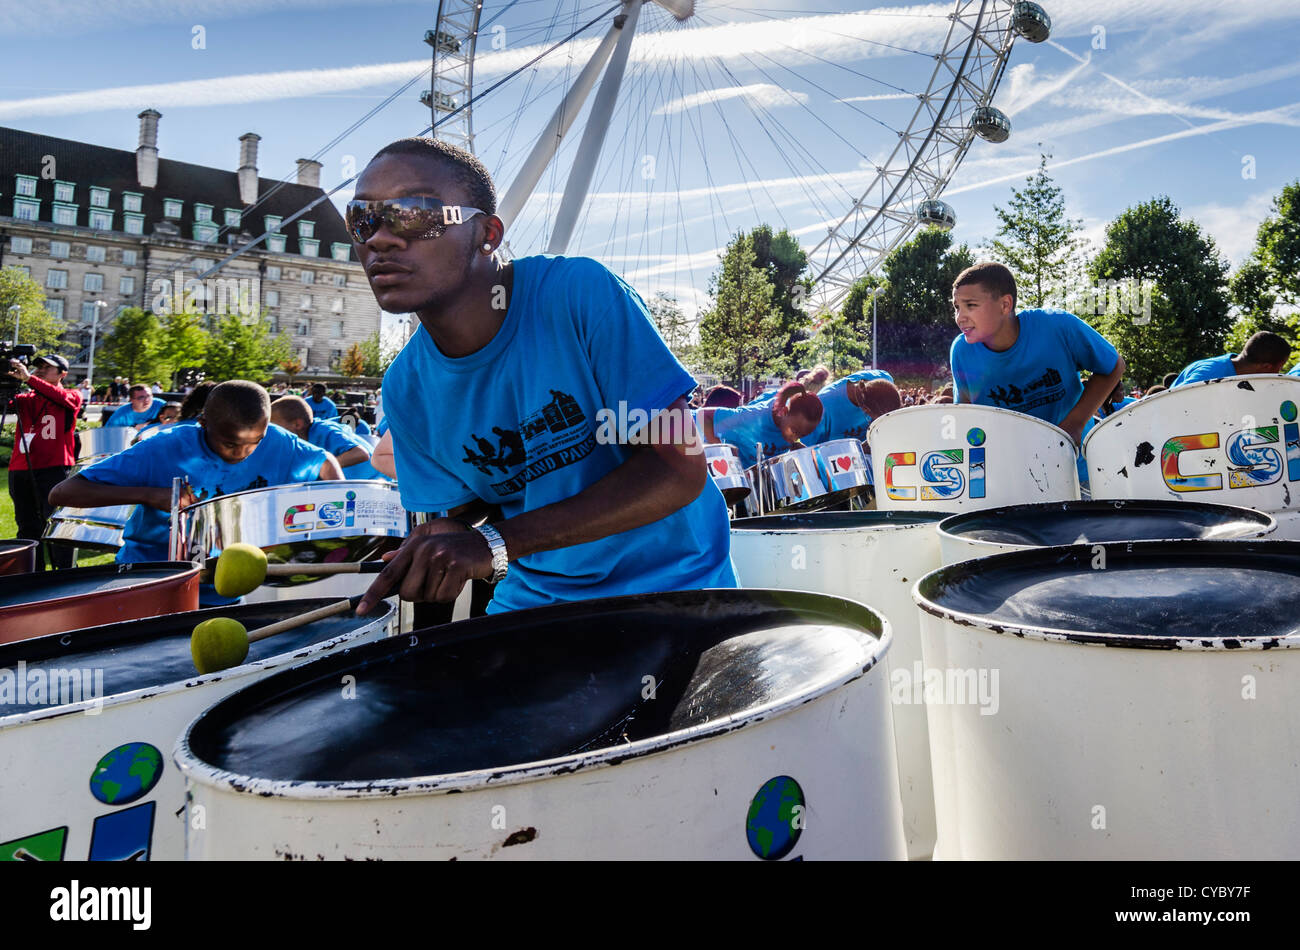 Steel pan (steel drums) players at the Thames Festival 2012. Performance of One Thousand Pans by Brent Holder & Fiona Hawthorne Stock Photo